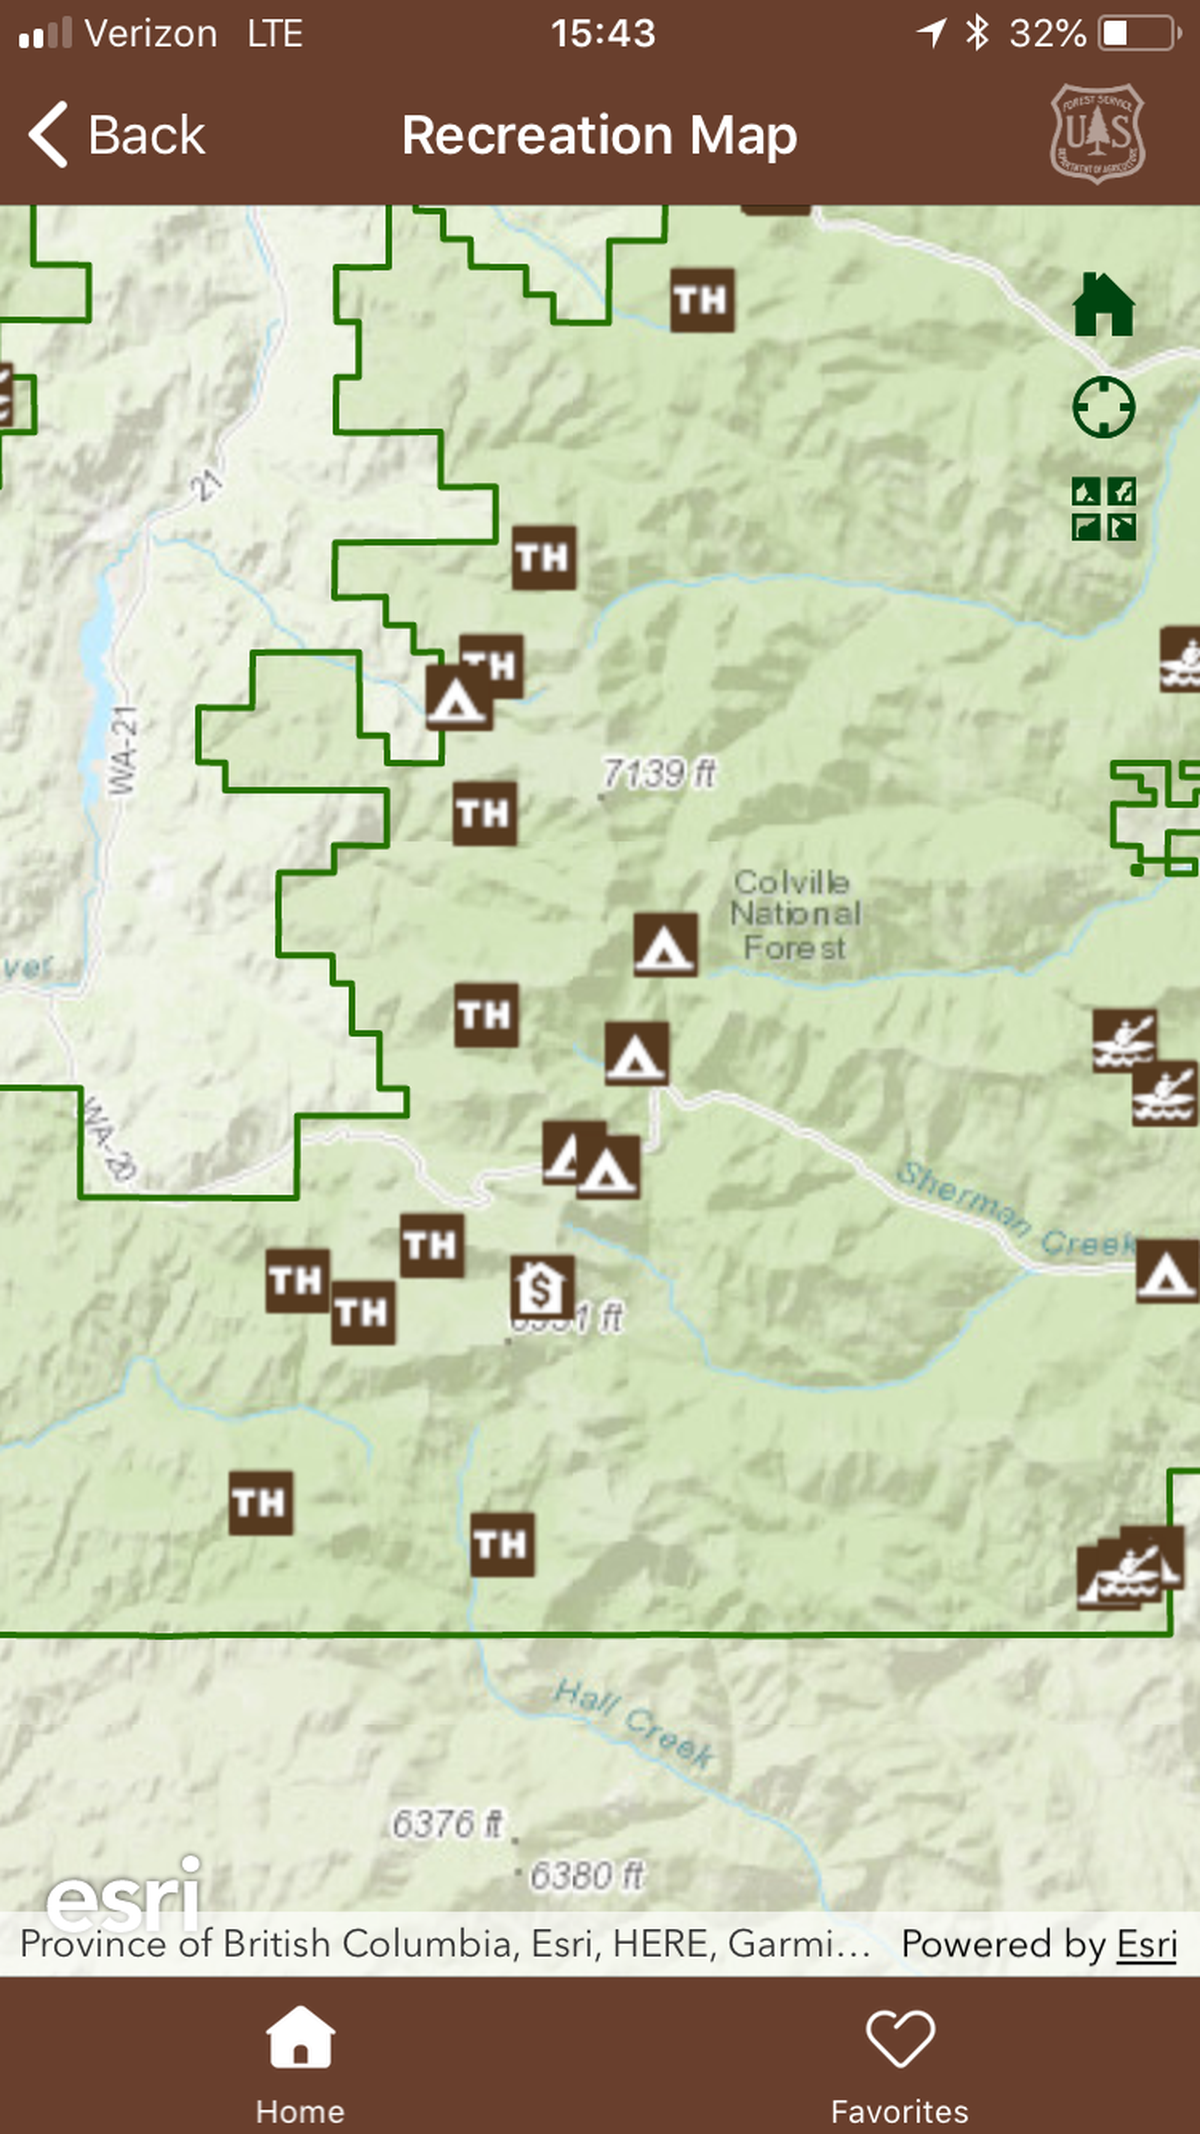 Launched Monday, the app covers national forests in Washington and Oregon, giving users information about trails, campgrounds, permits, weather, fire, recreation activities, frequency of use and more.